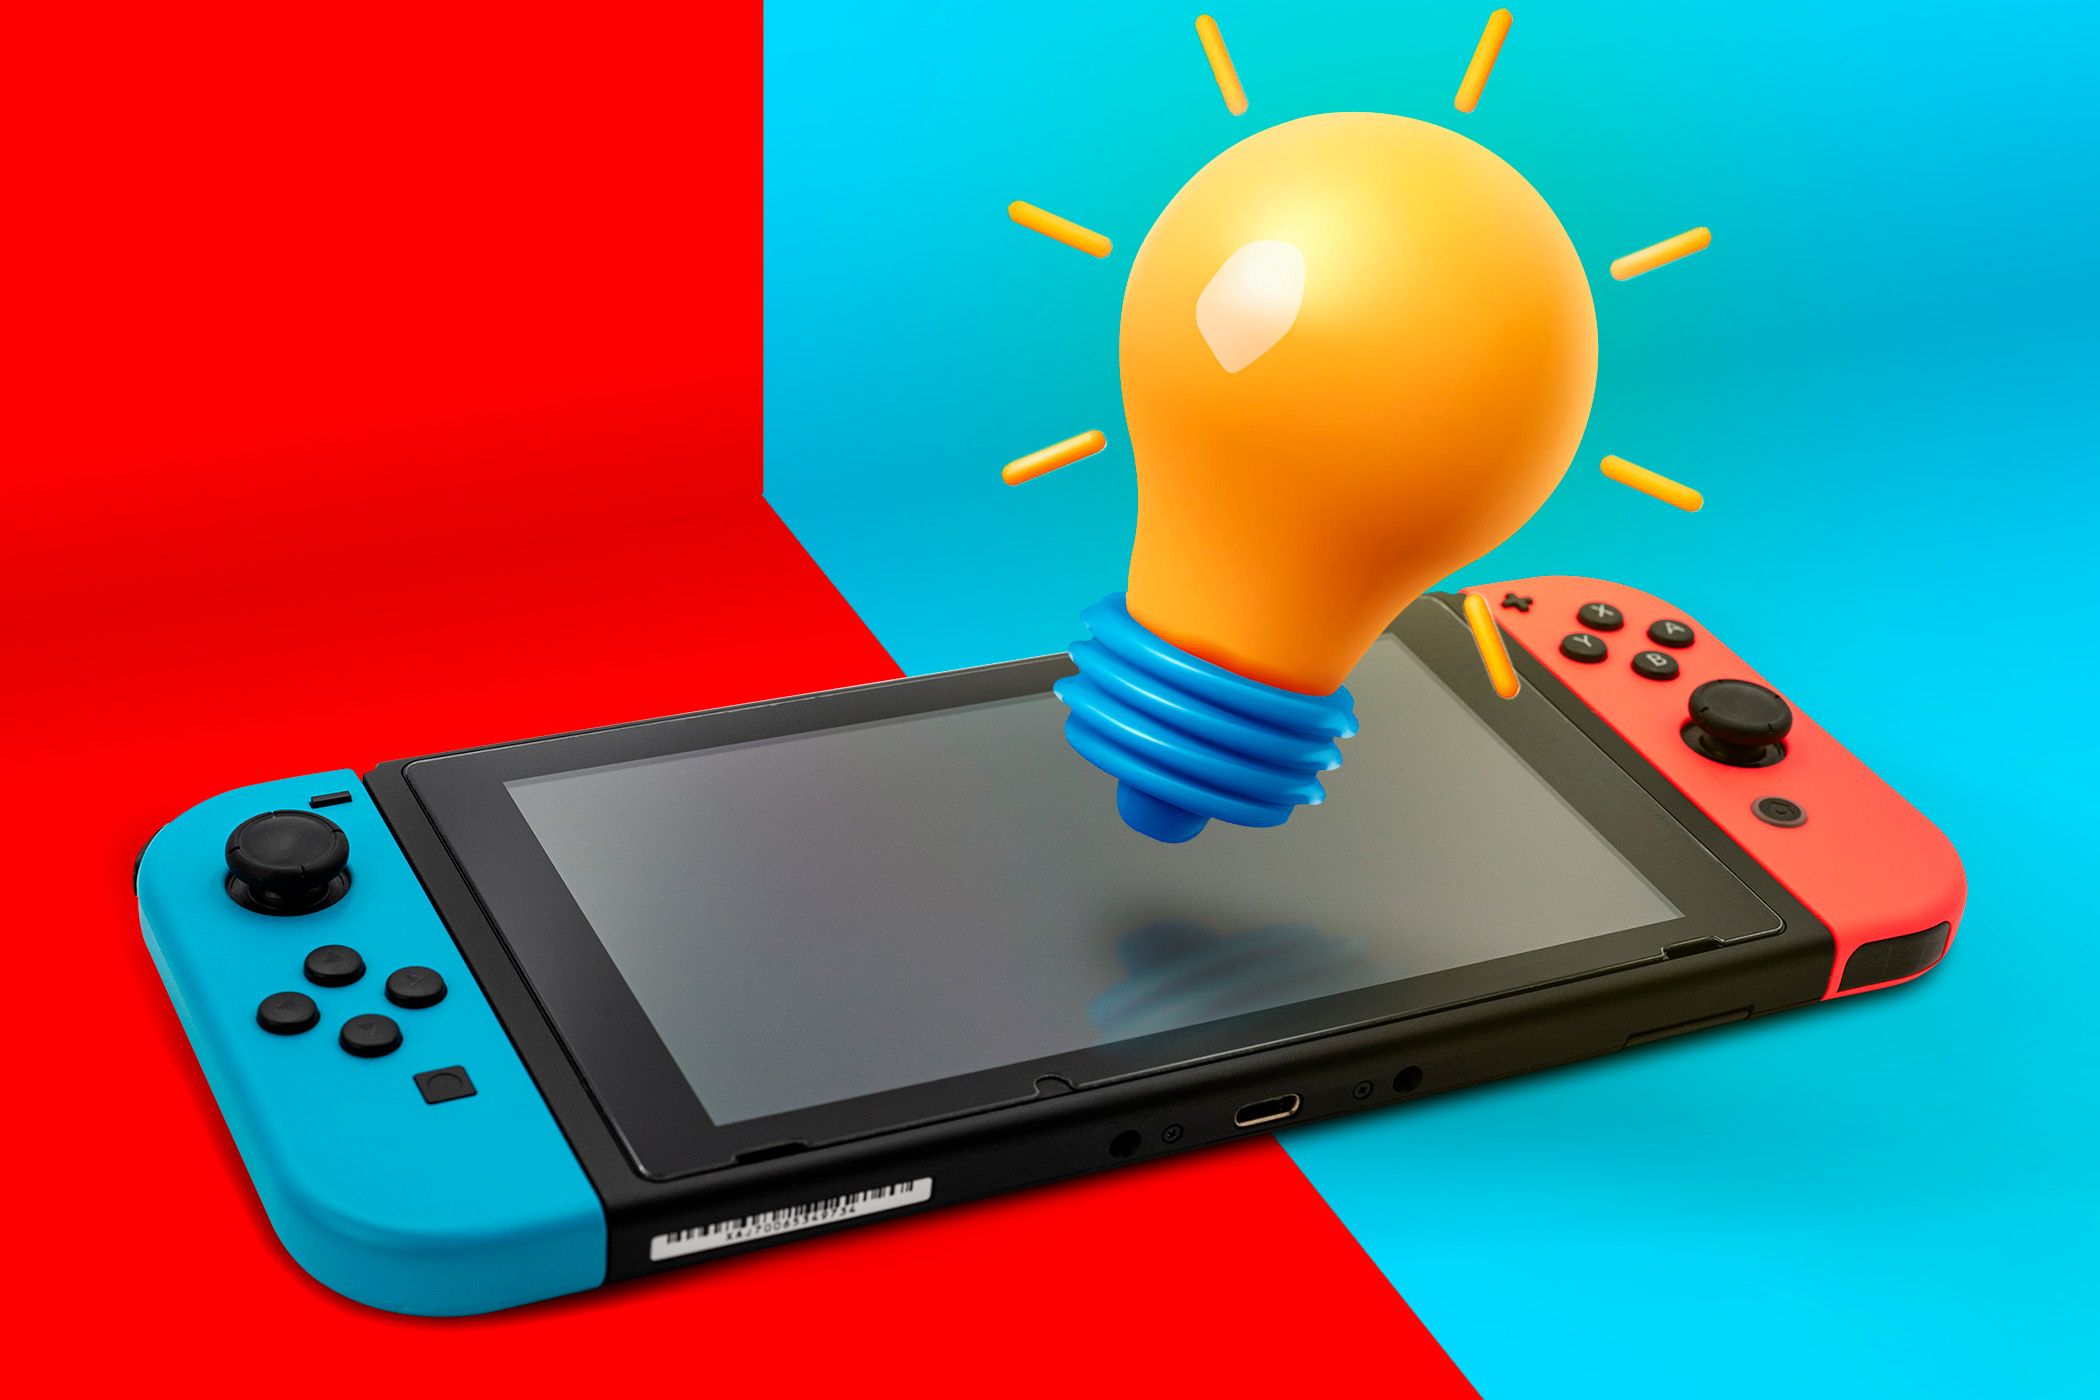 A Nintendo Switch with a tip lamp above it.